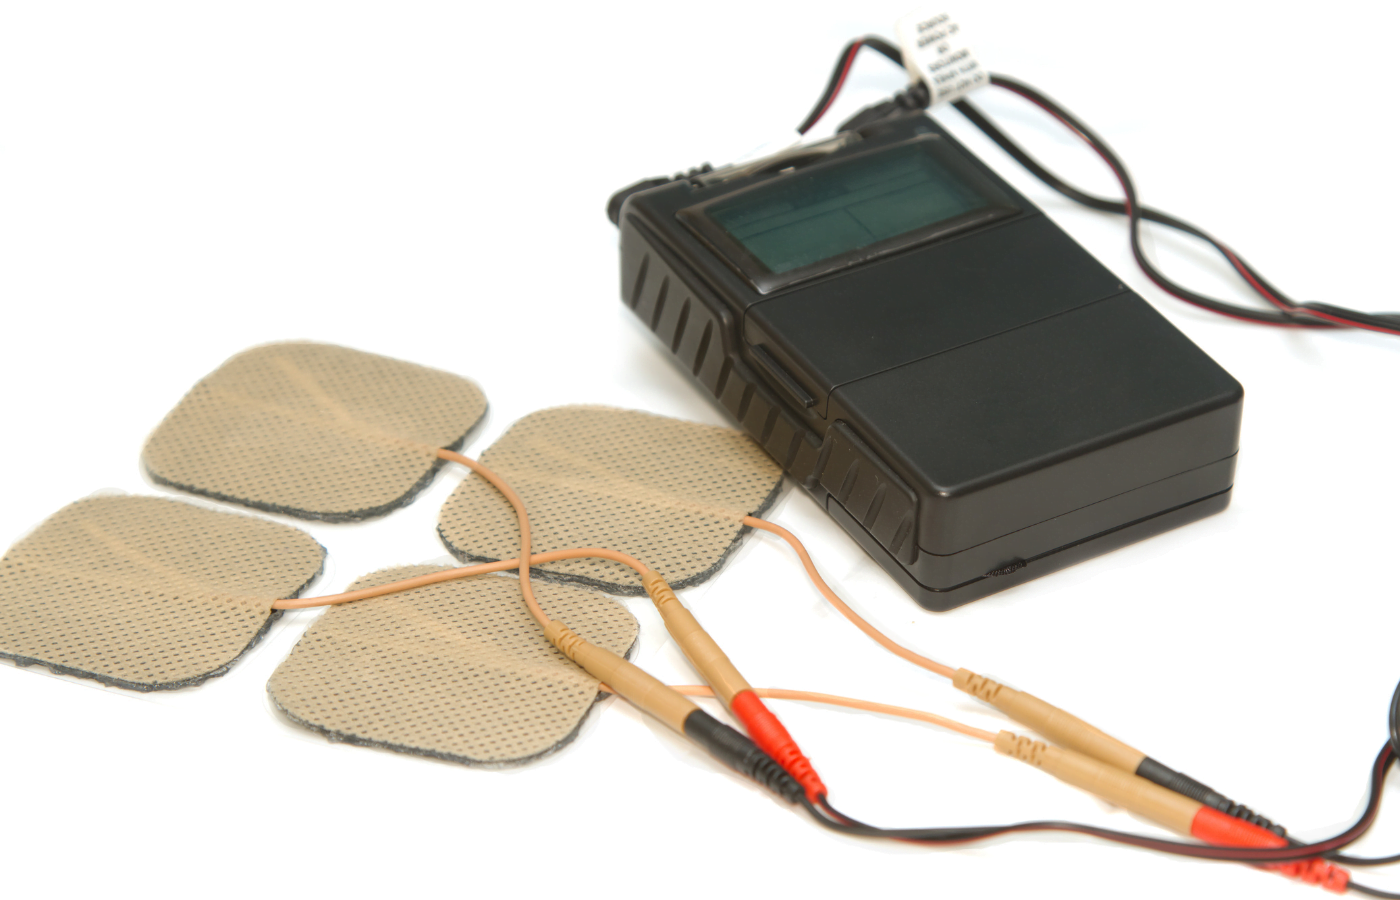 Overview of Transcutaneous Electric Nerve Stimulation (TENS)